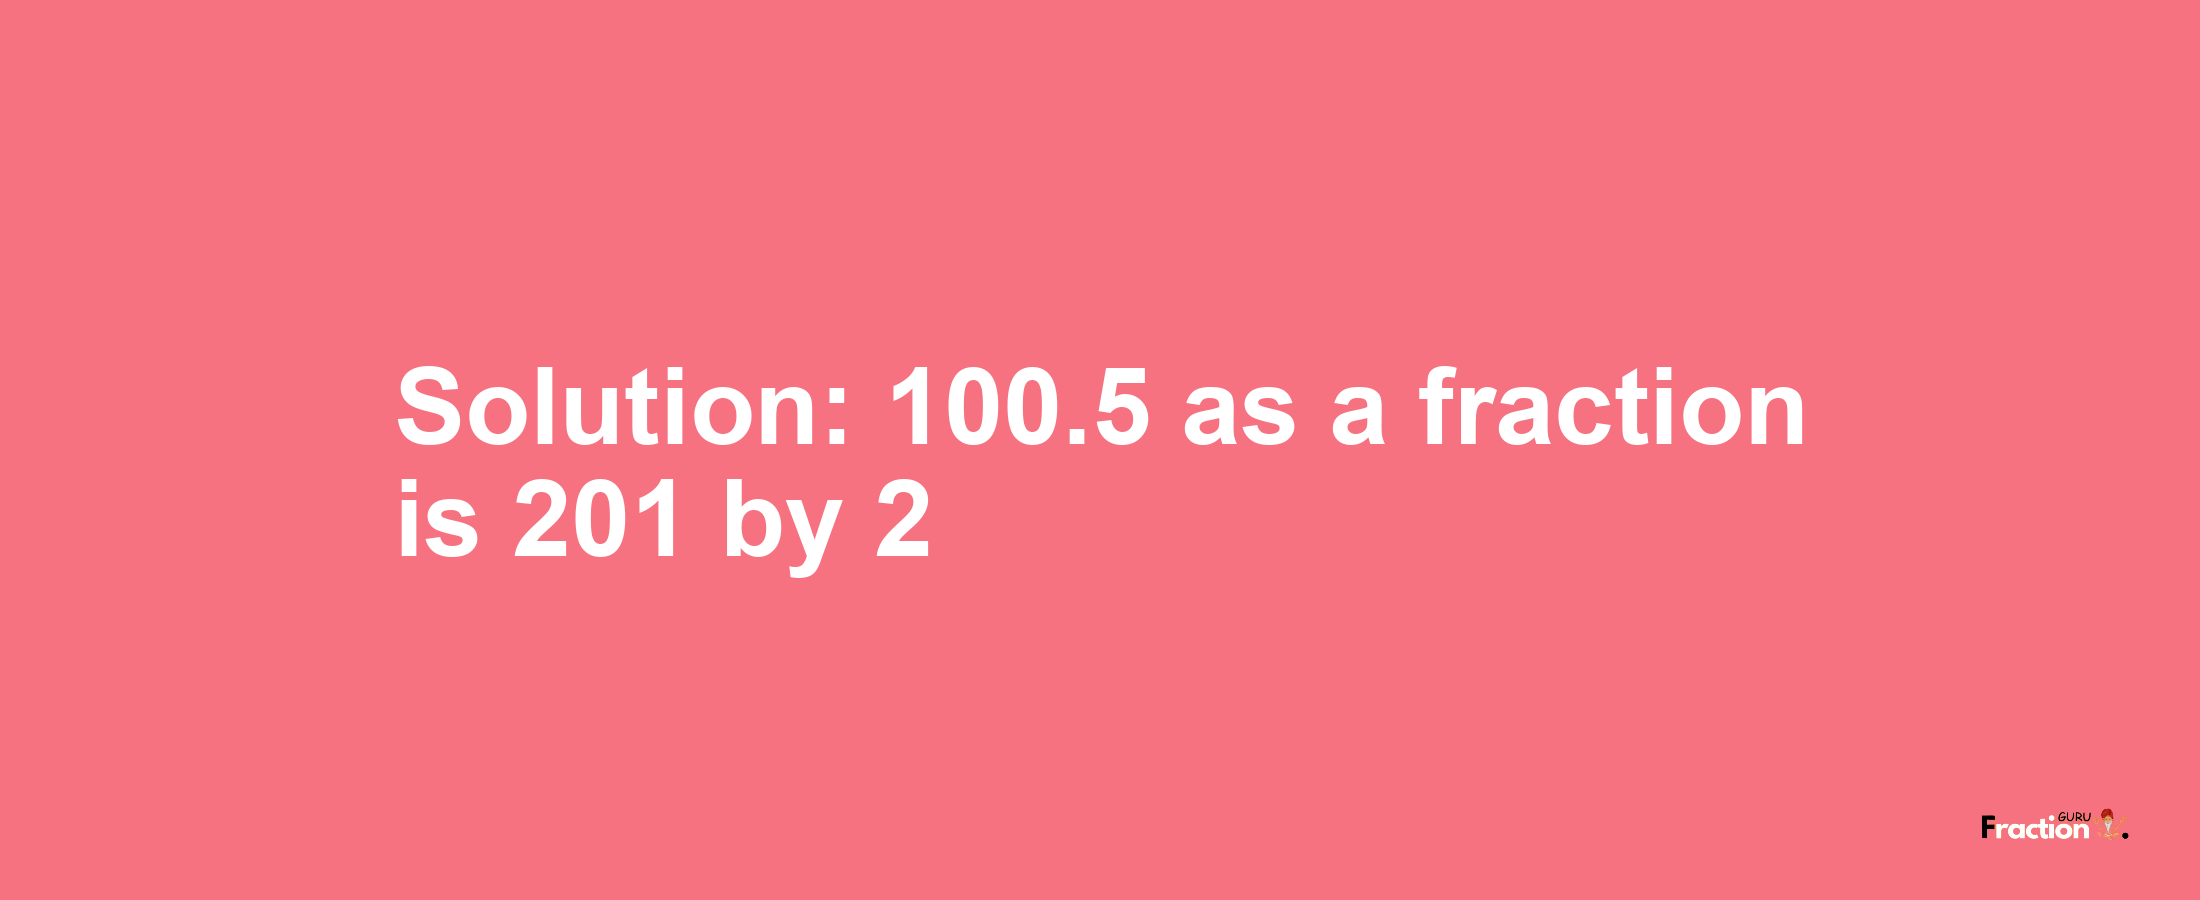 Solution:100.5 as a fraction is 201/2